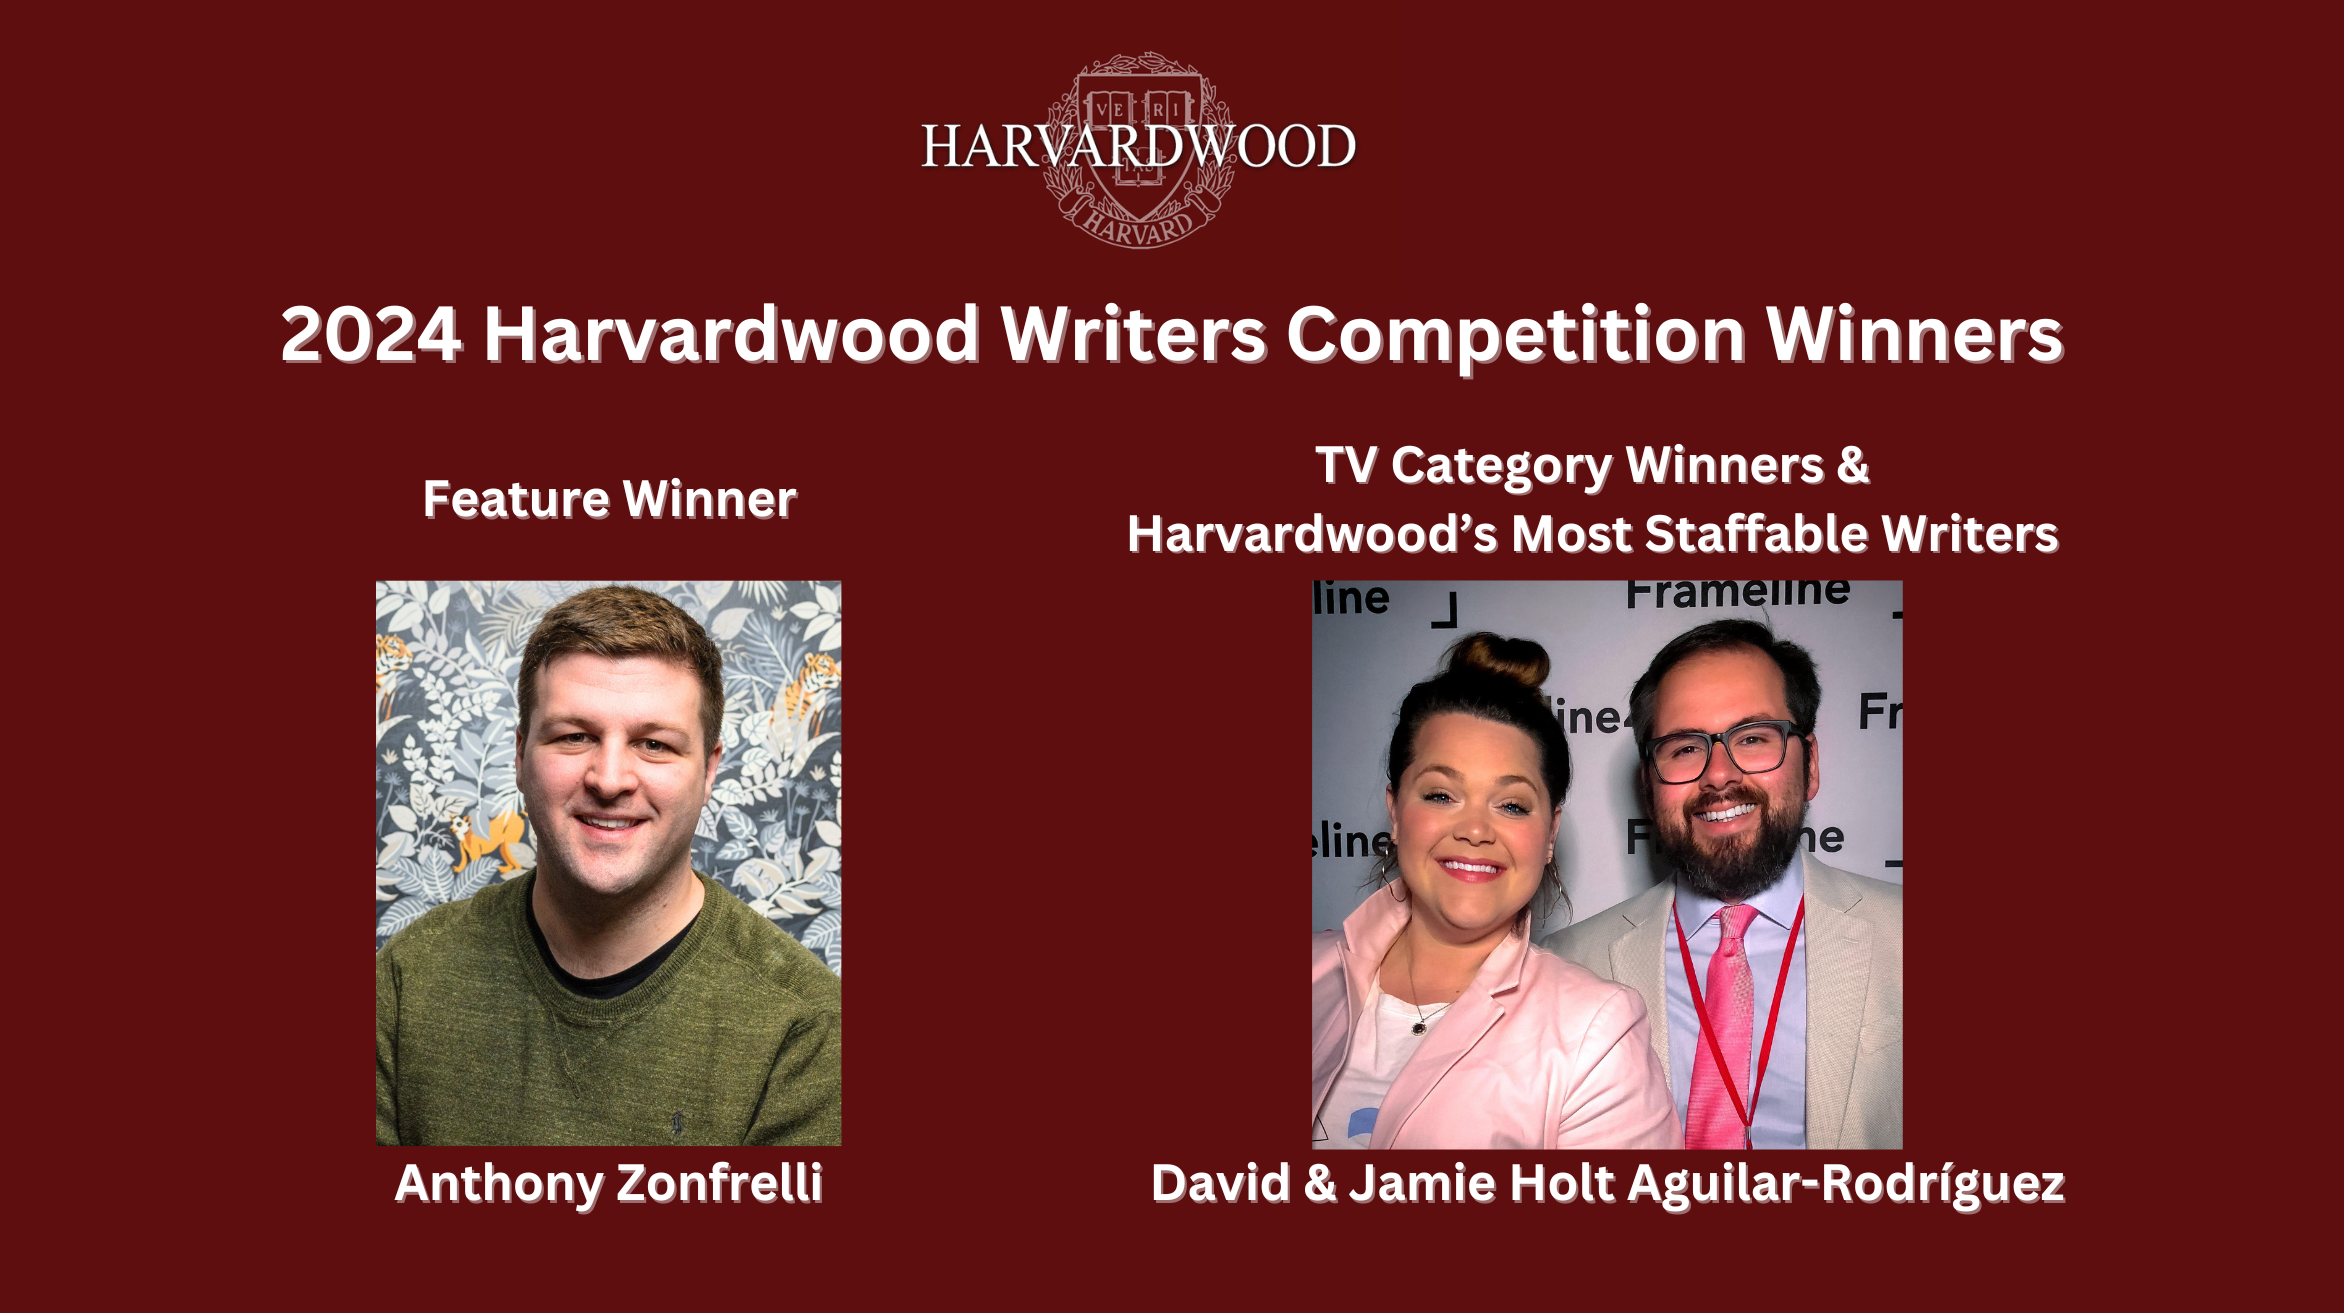 ... Reveals Writers Competition Winners For Feature And TV Categories; Additional Award Given For Most Staffable TV...